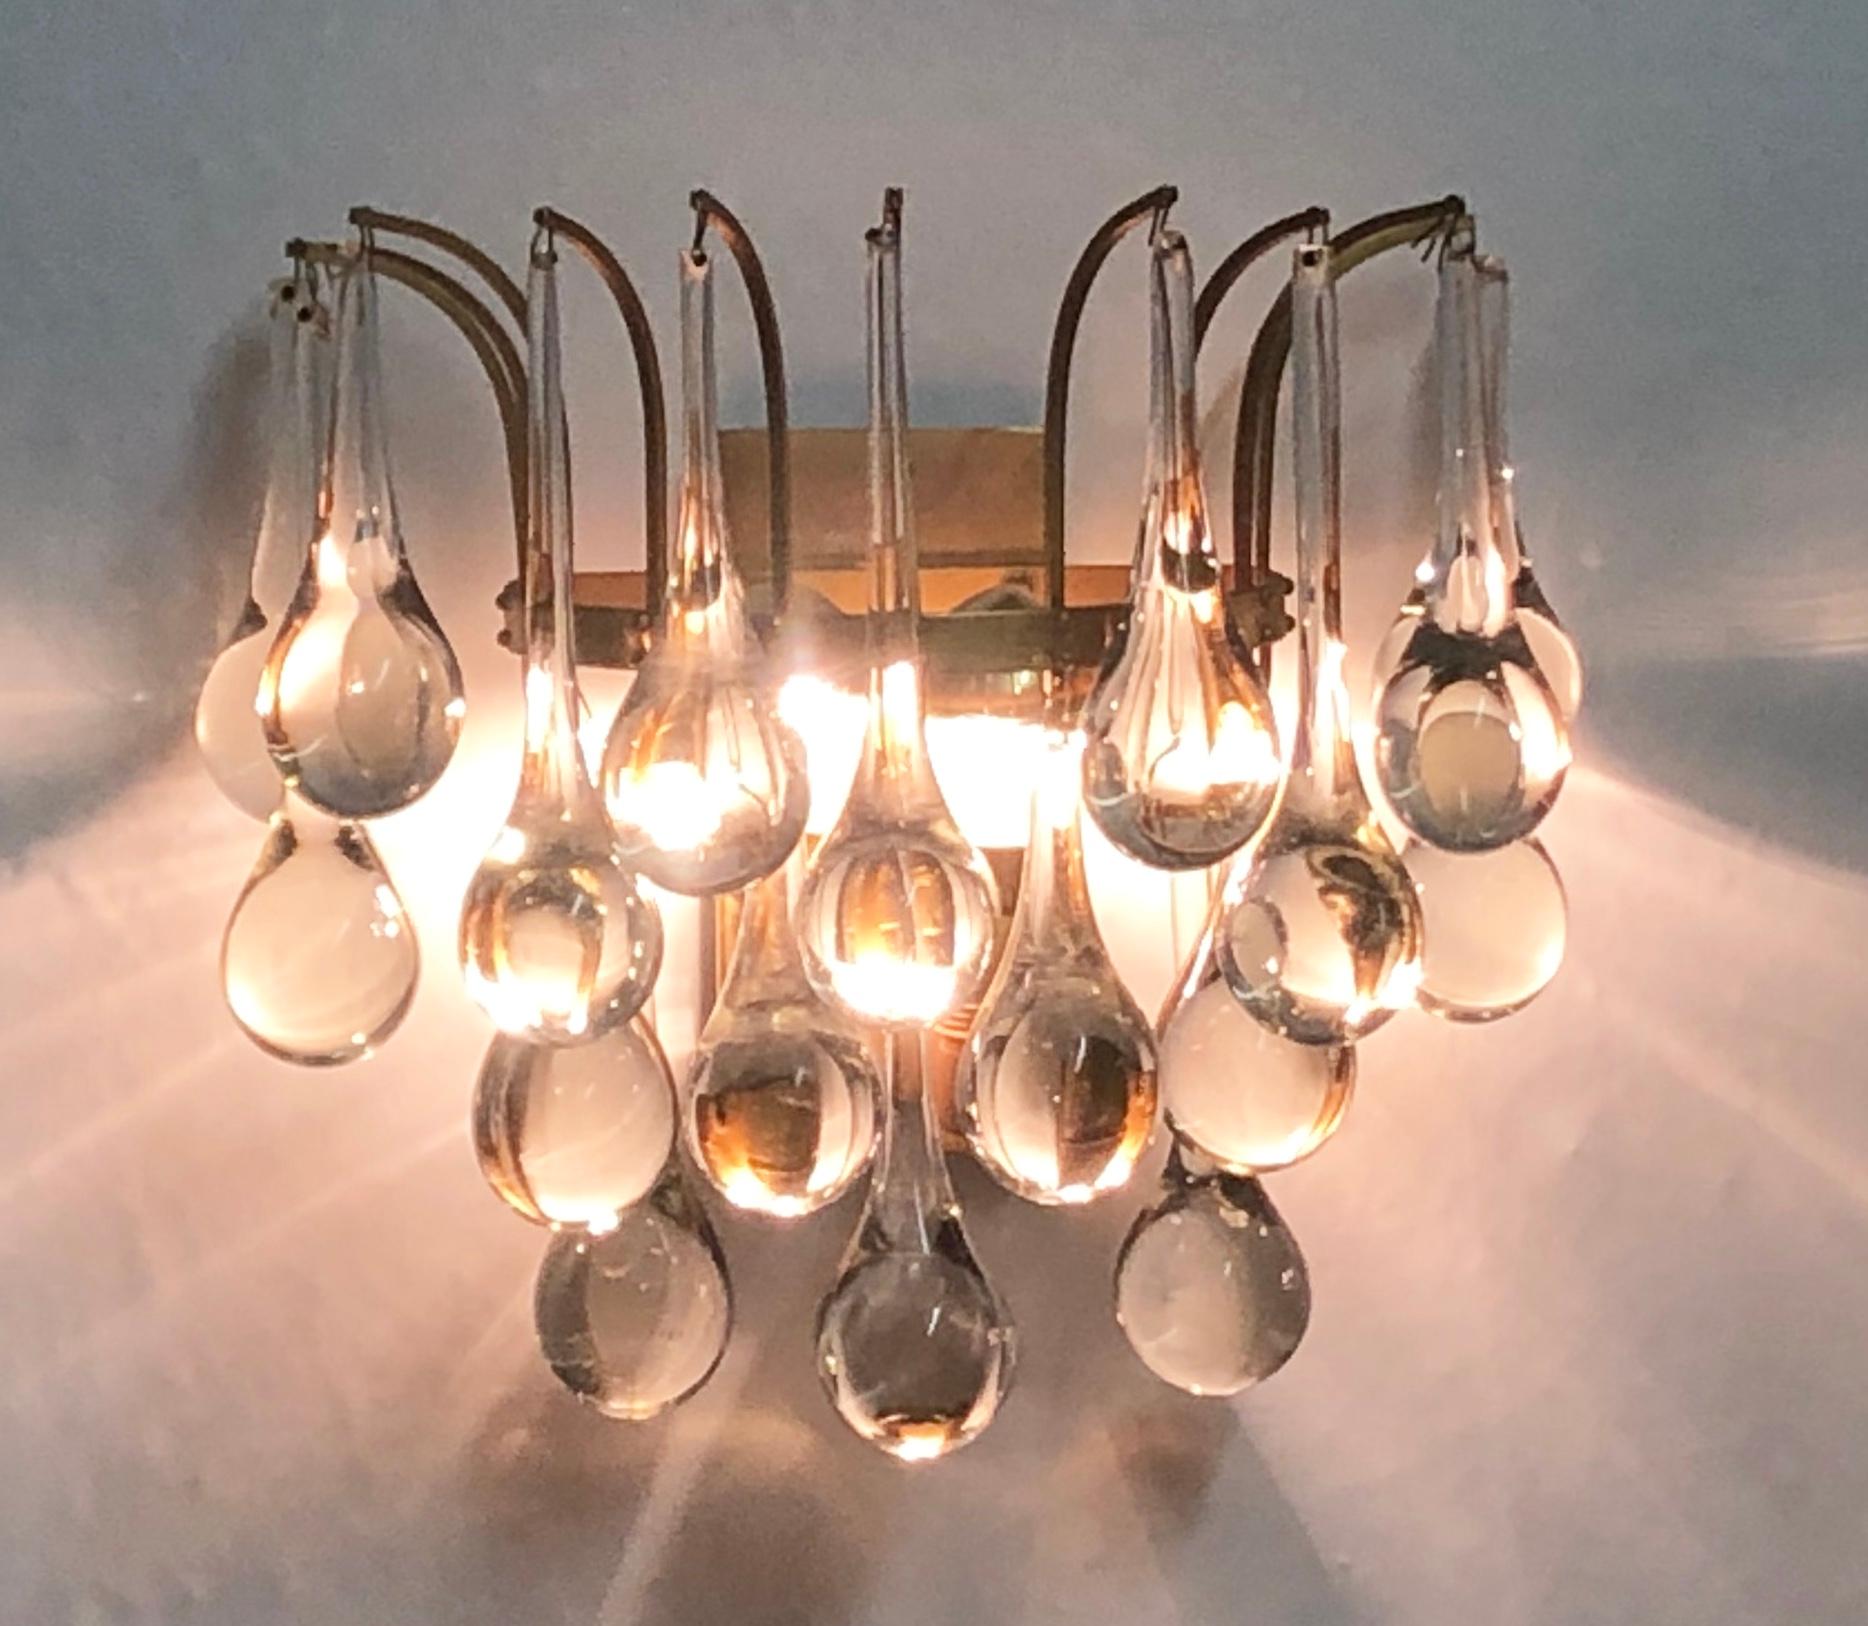 Precious, elegant pair of midcentury brass and Murano crystal drops wall lights by E.Palme, Germany, circa 1960s.
The wall lights are made of gilt brass and clear Murano glass drops.
Socket: each two x E14 - for standard screw bulbs.
Excellent